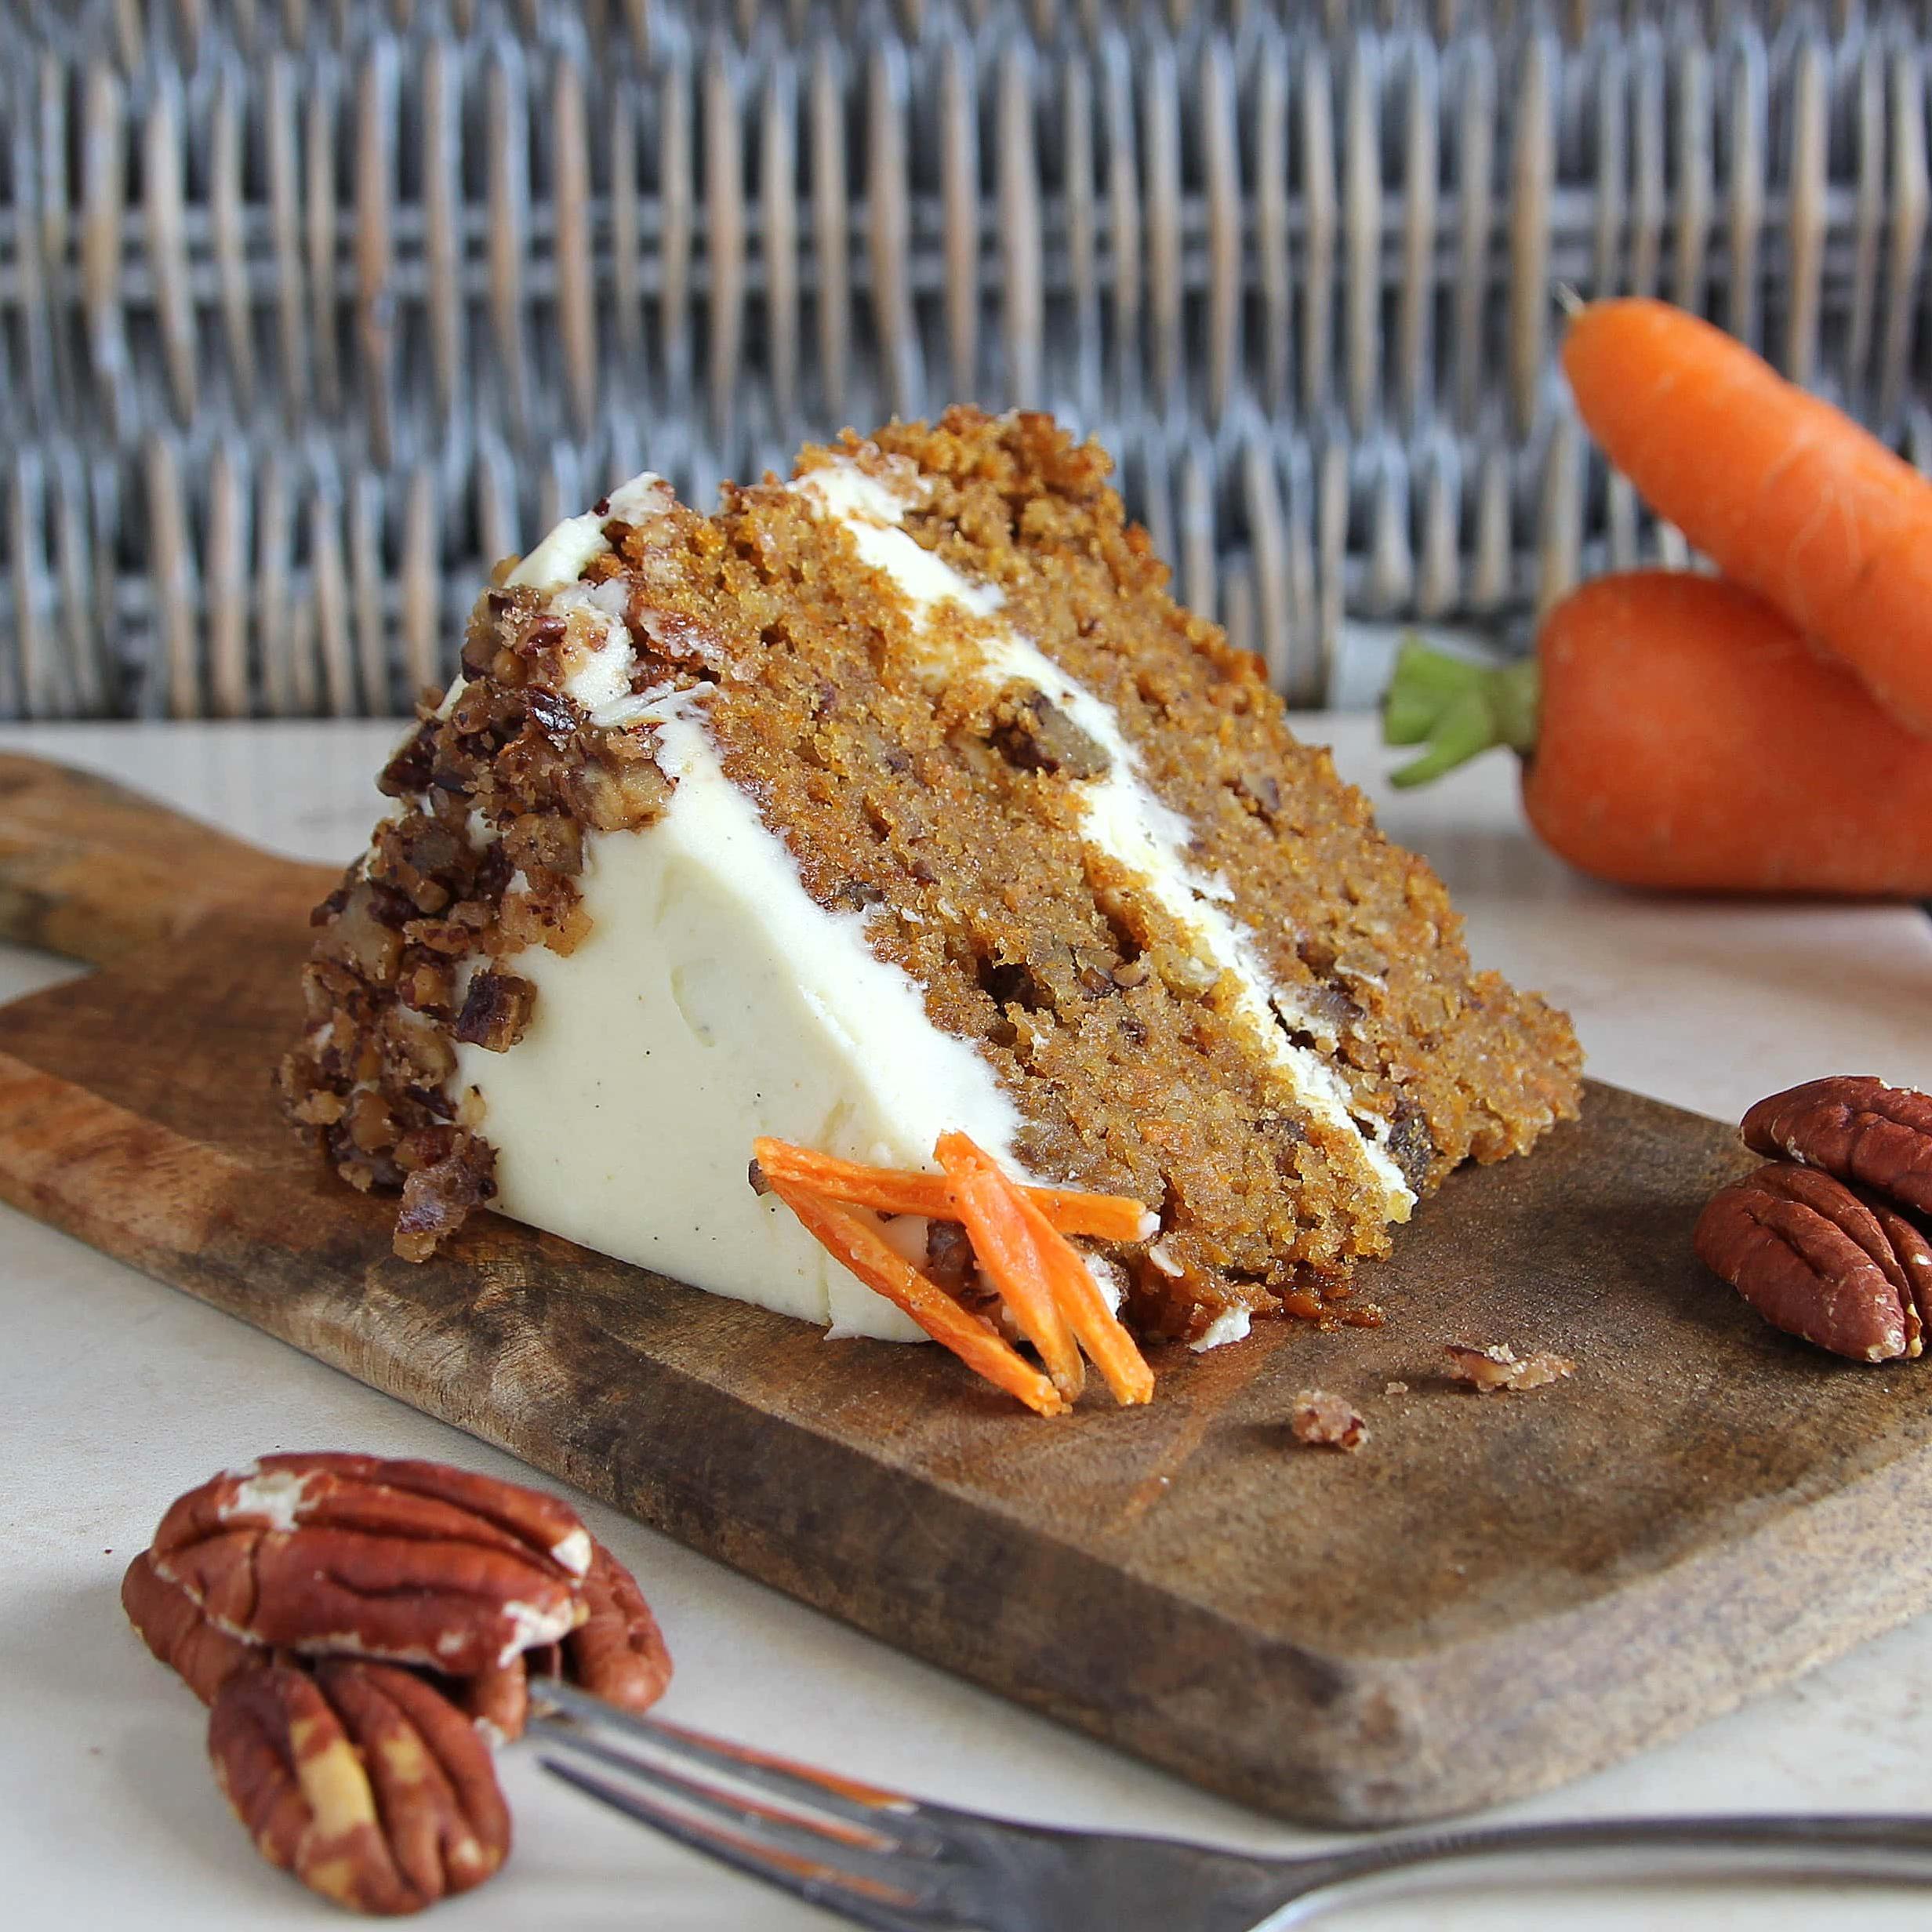  Moist, delicious, and packed with flavor - this is the best carrot cake ever!